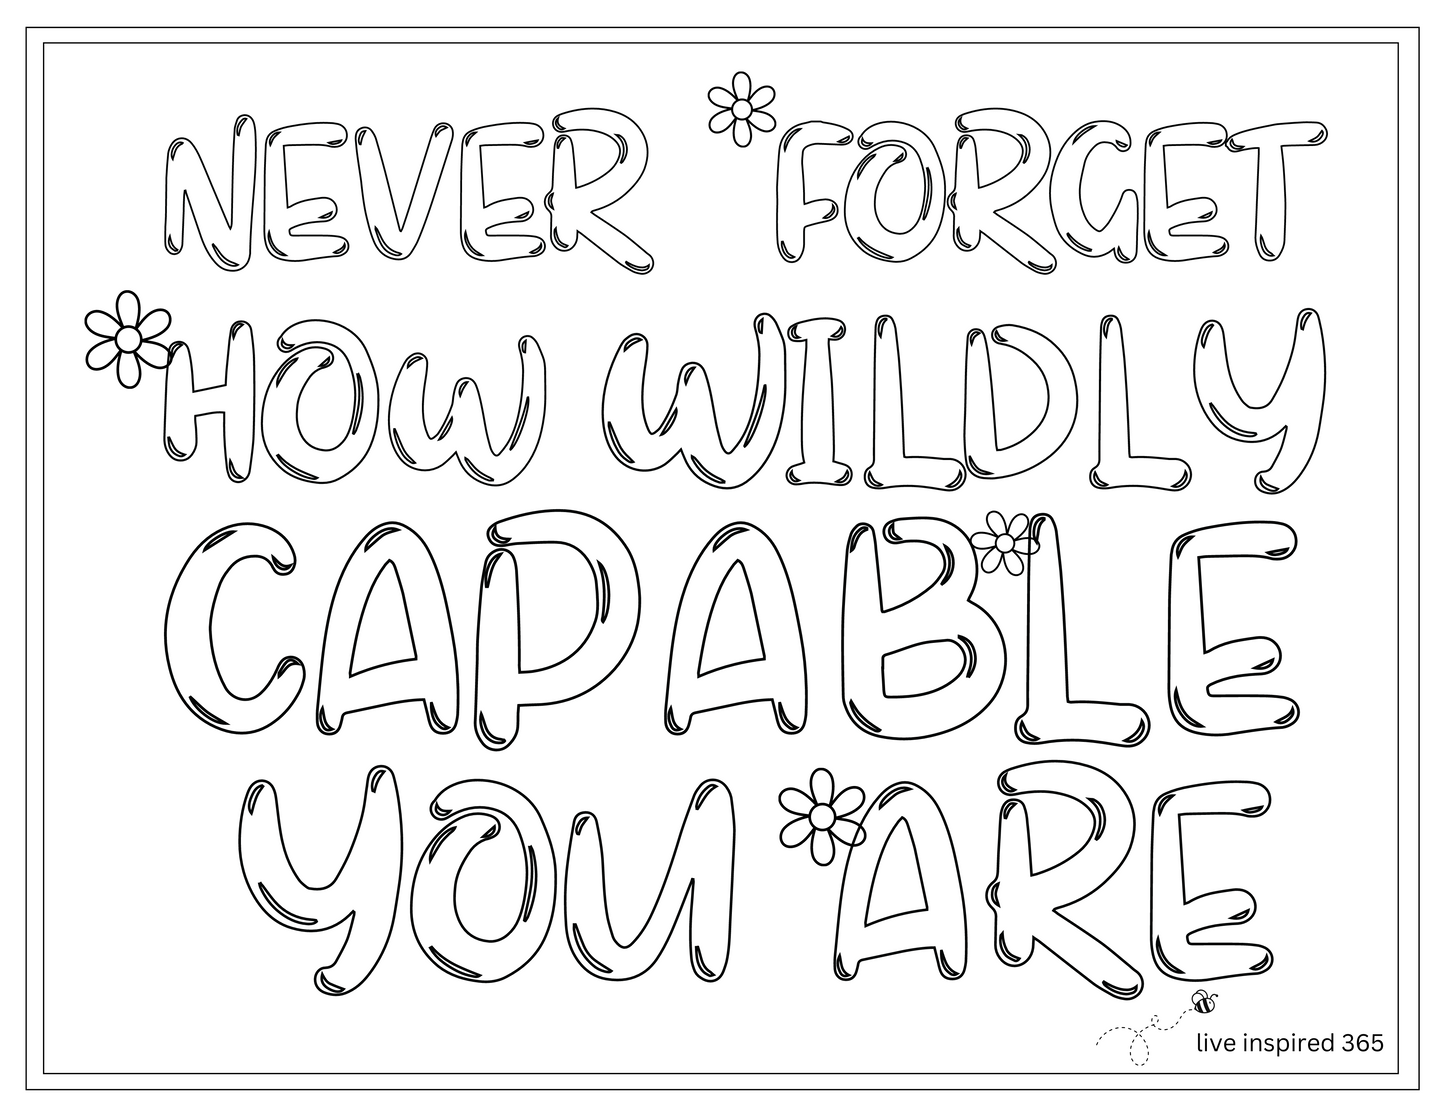 Wildly Capable-Coloring Page